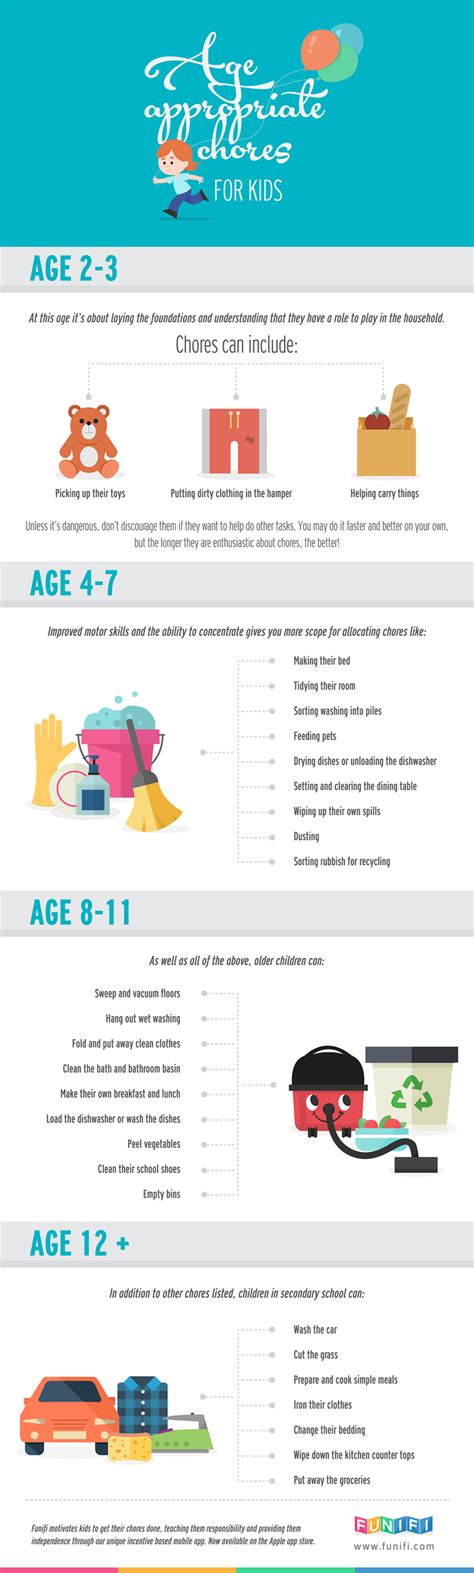 Infographic Age Appropriate Kids Chore Chart Infographic Flavour